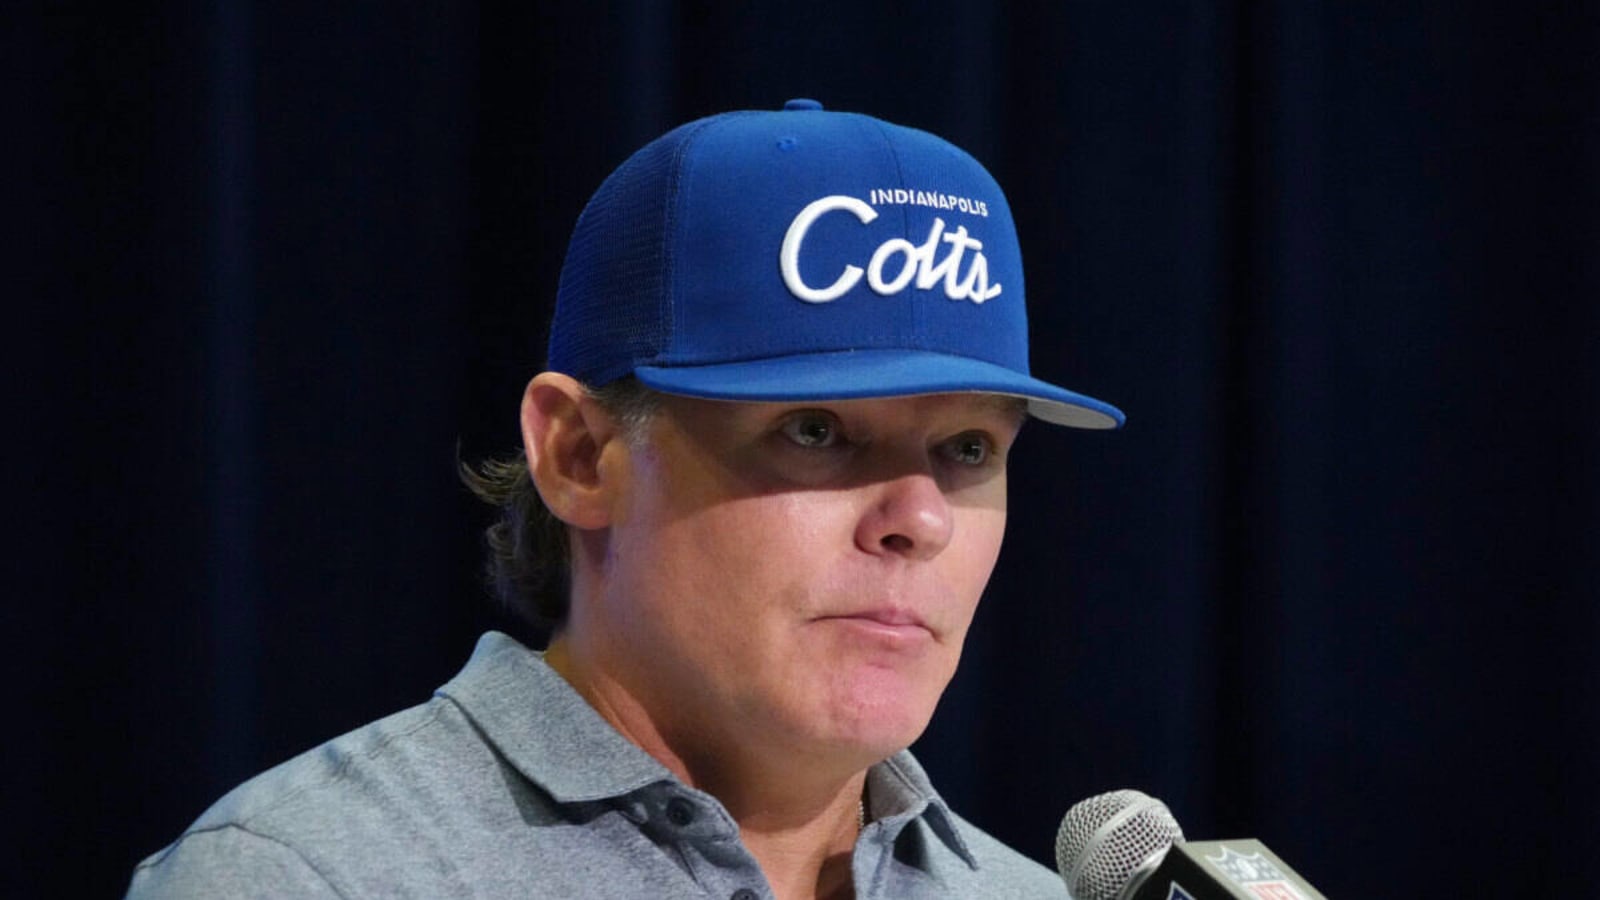 The NFL told the Colts exactly what they think about them